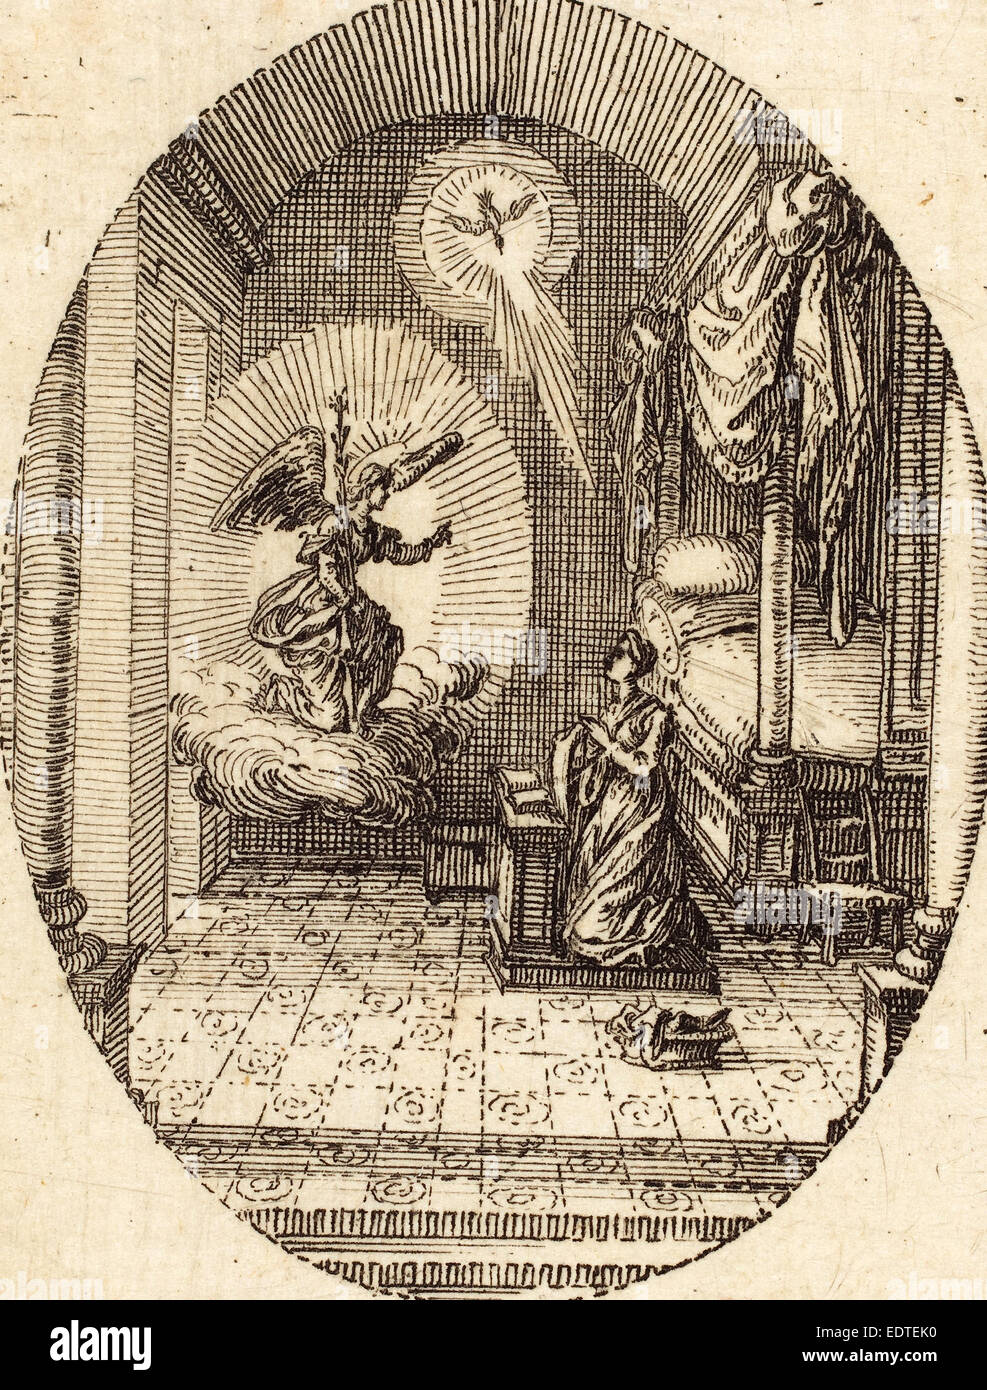 Jacques Callot (French, 1592 - 1635), The Annunciation, c. 1631, etching Stock Photo